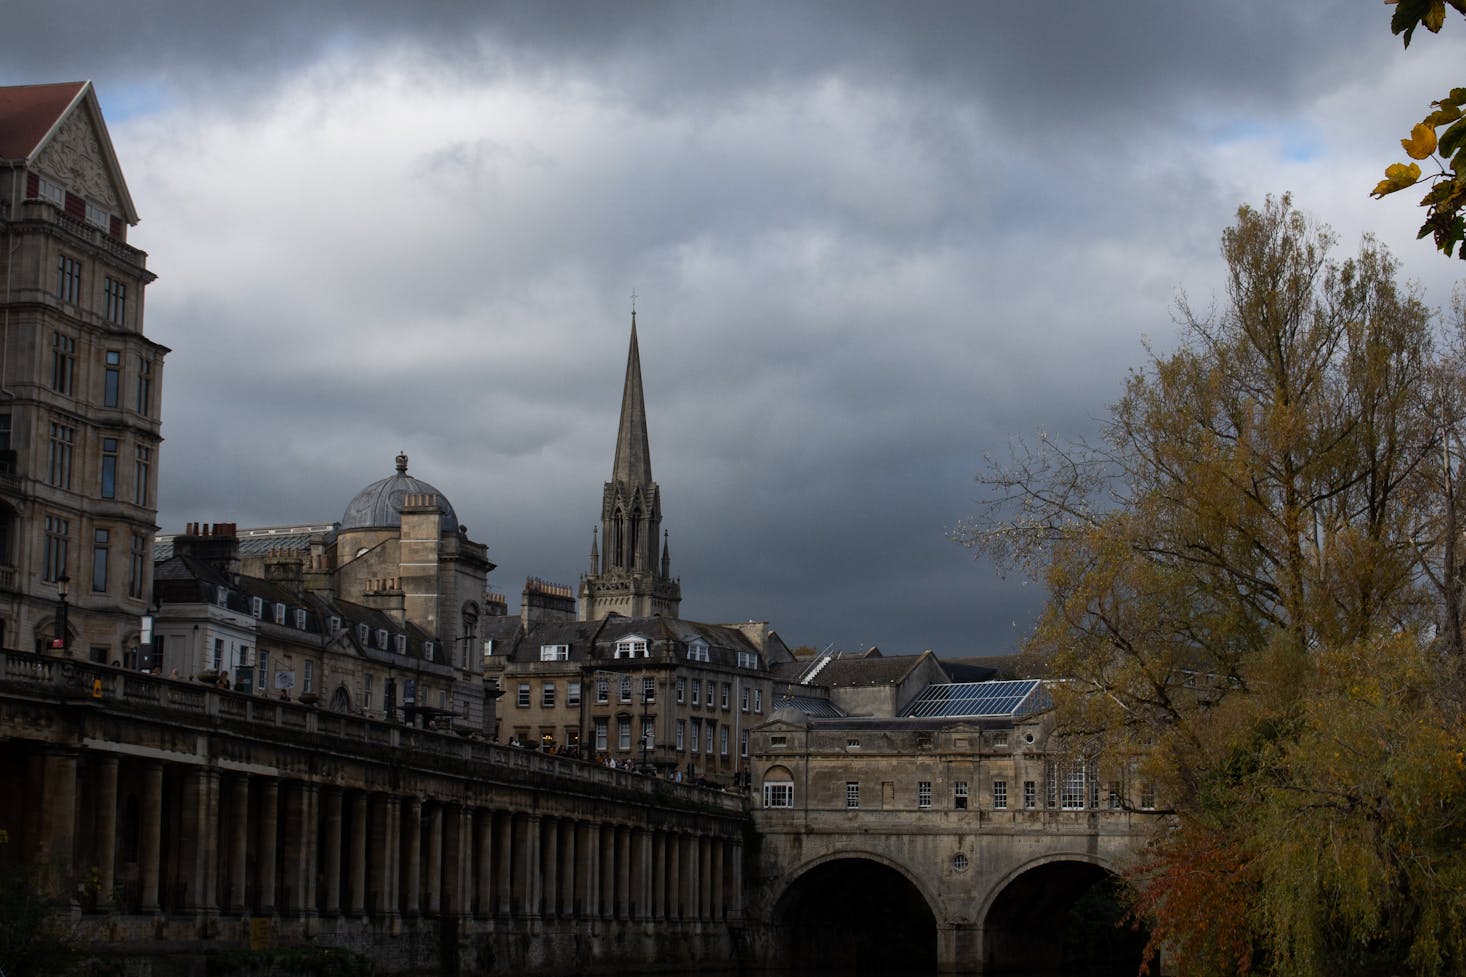 Things to do in Bath at night